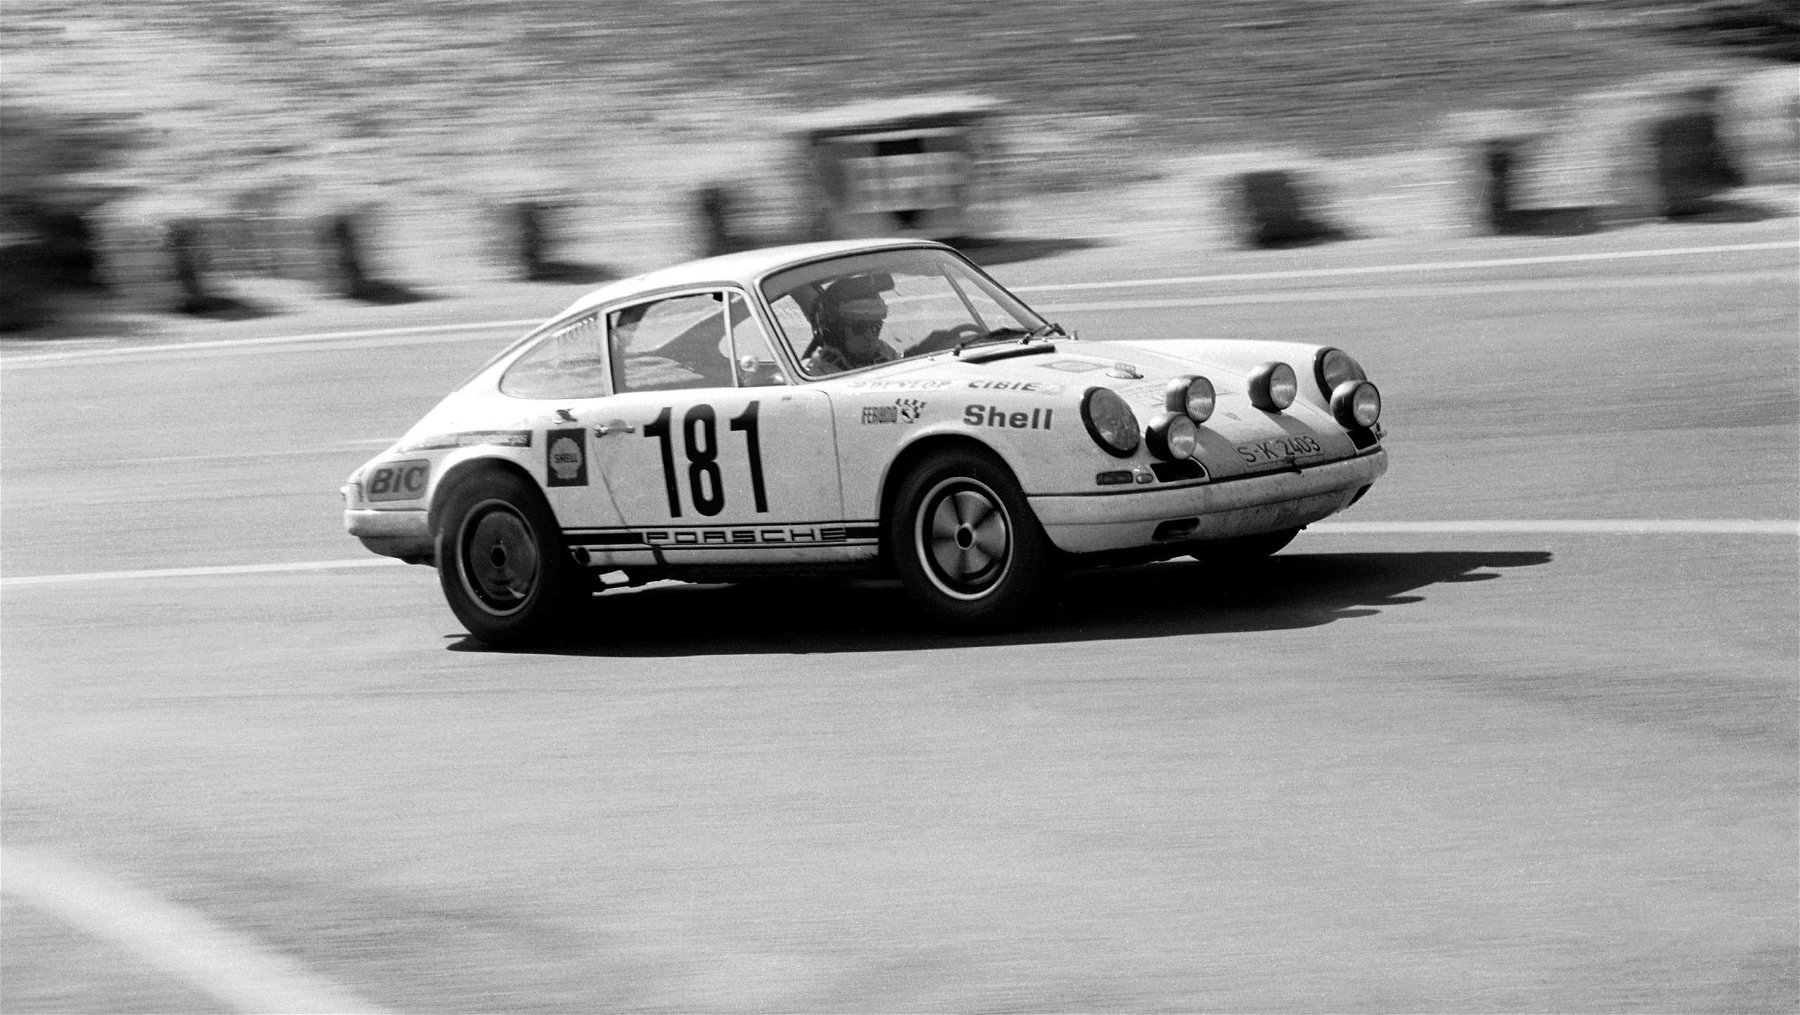 R = Racing: The historical roots of the 911 R